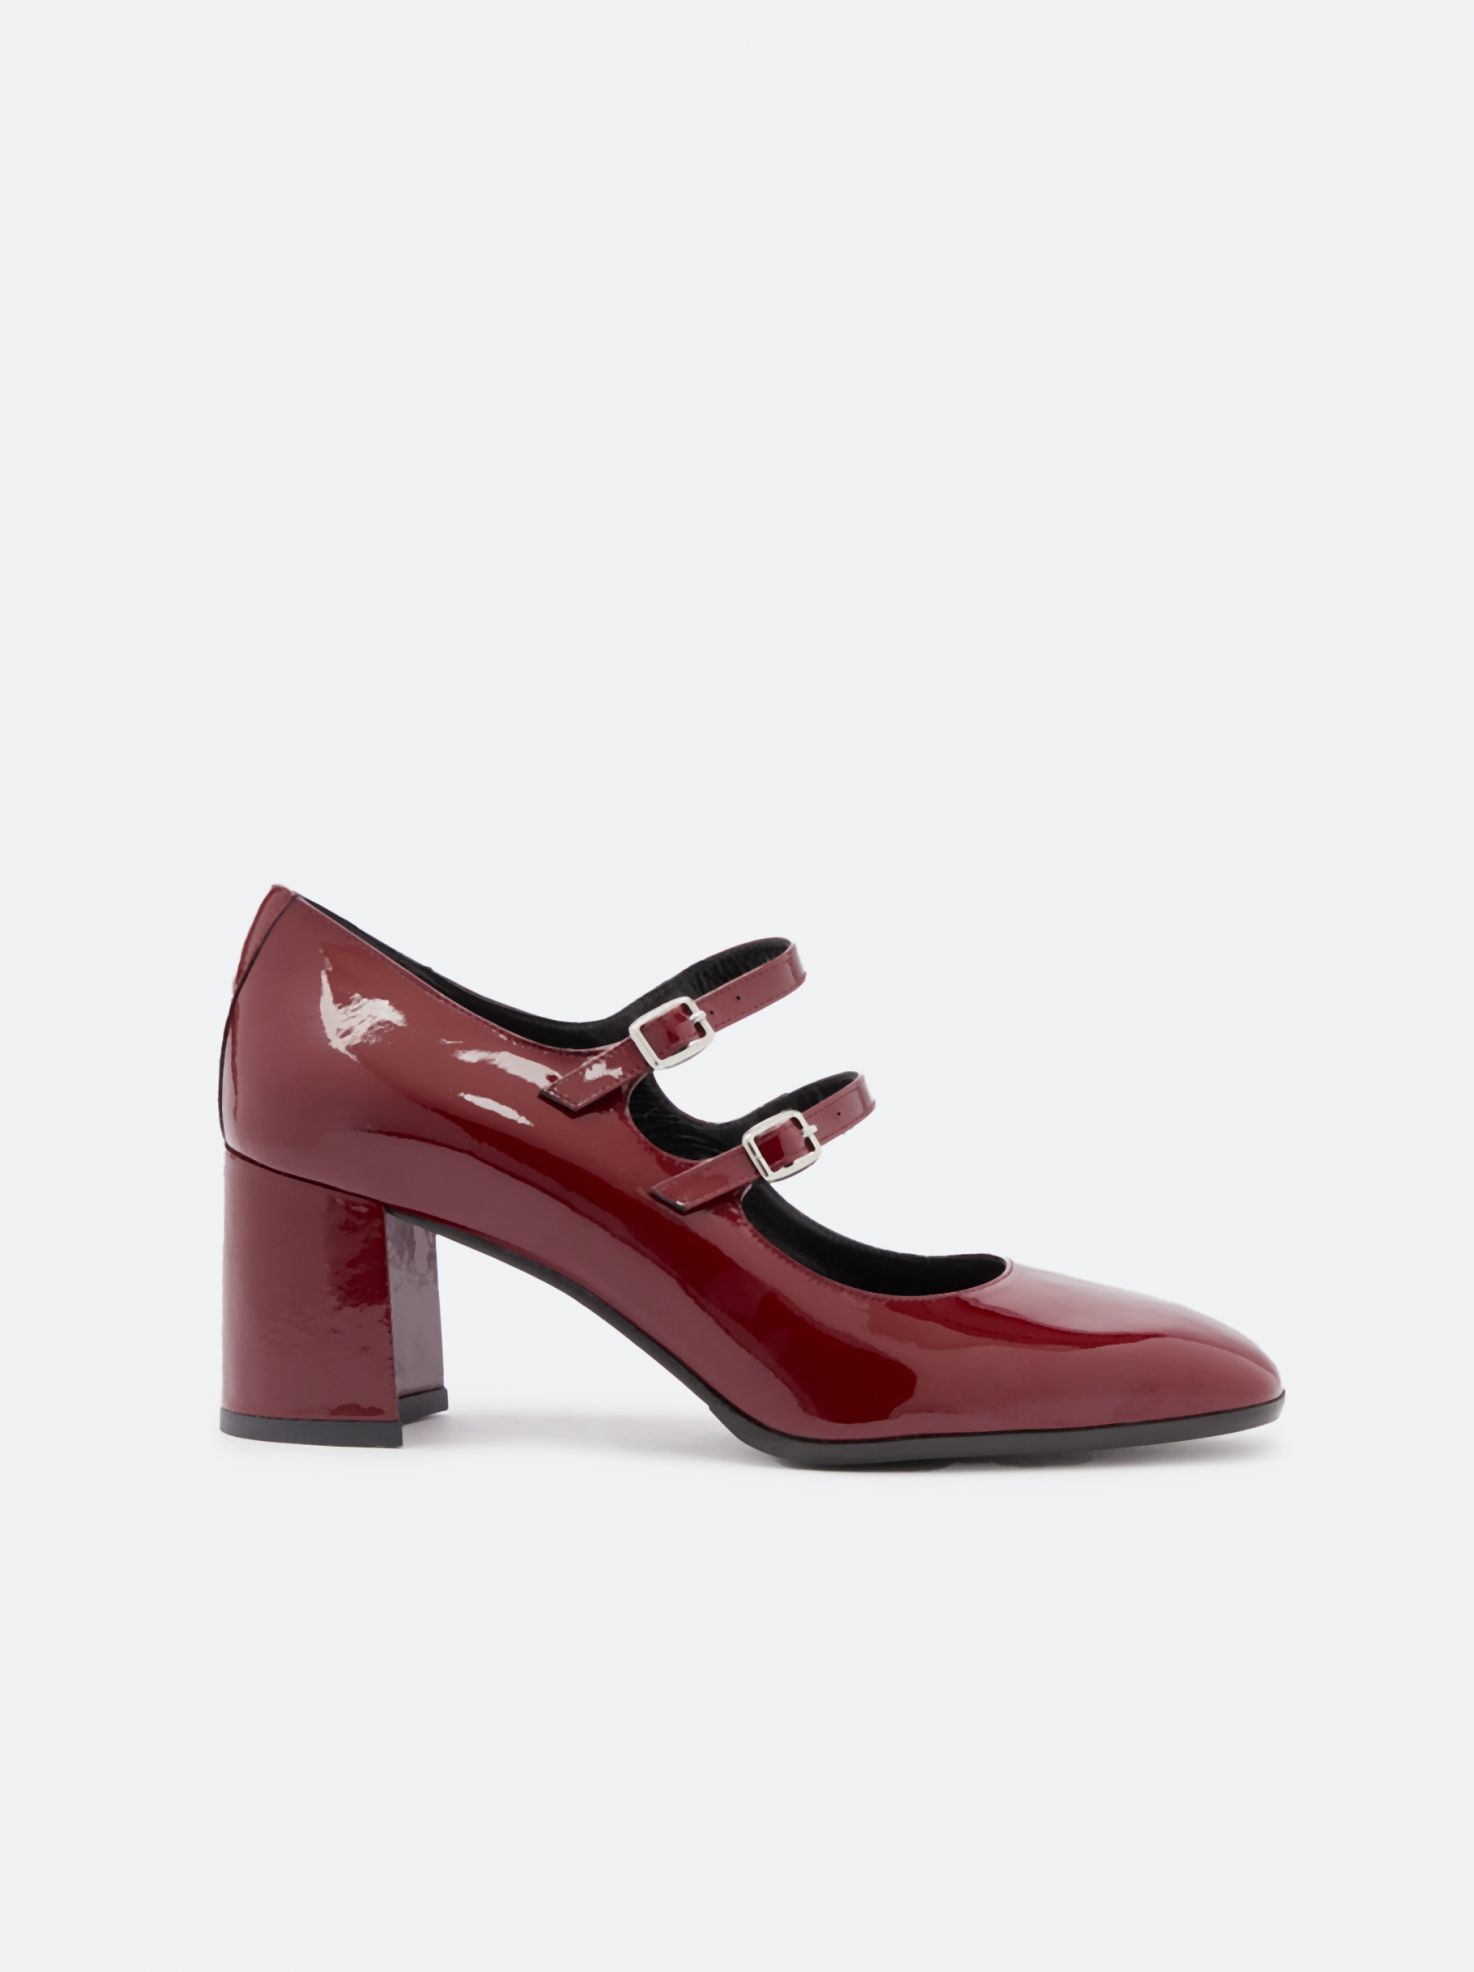 Womens Burgundy Leather Mary Janes Shoes, Women Mary Jane 